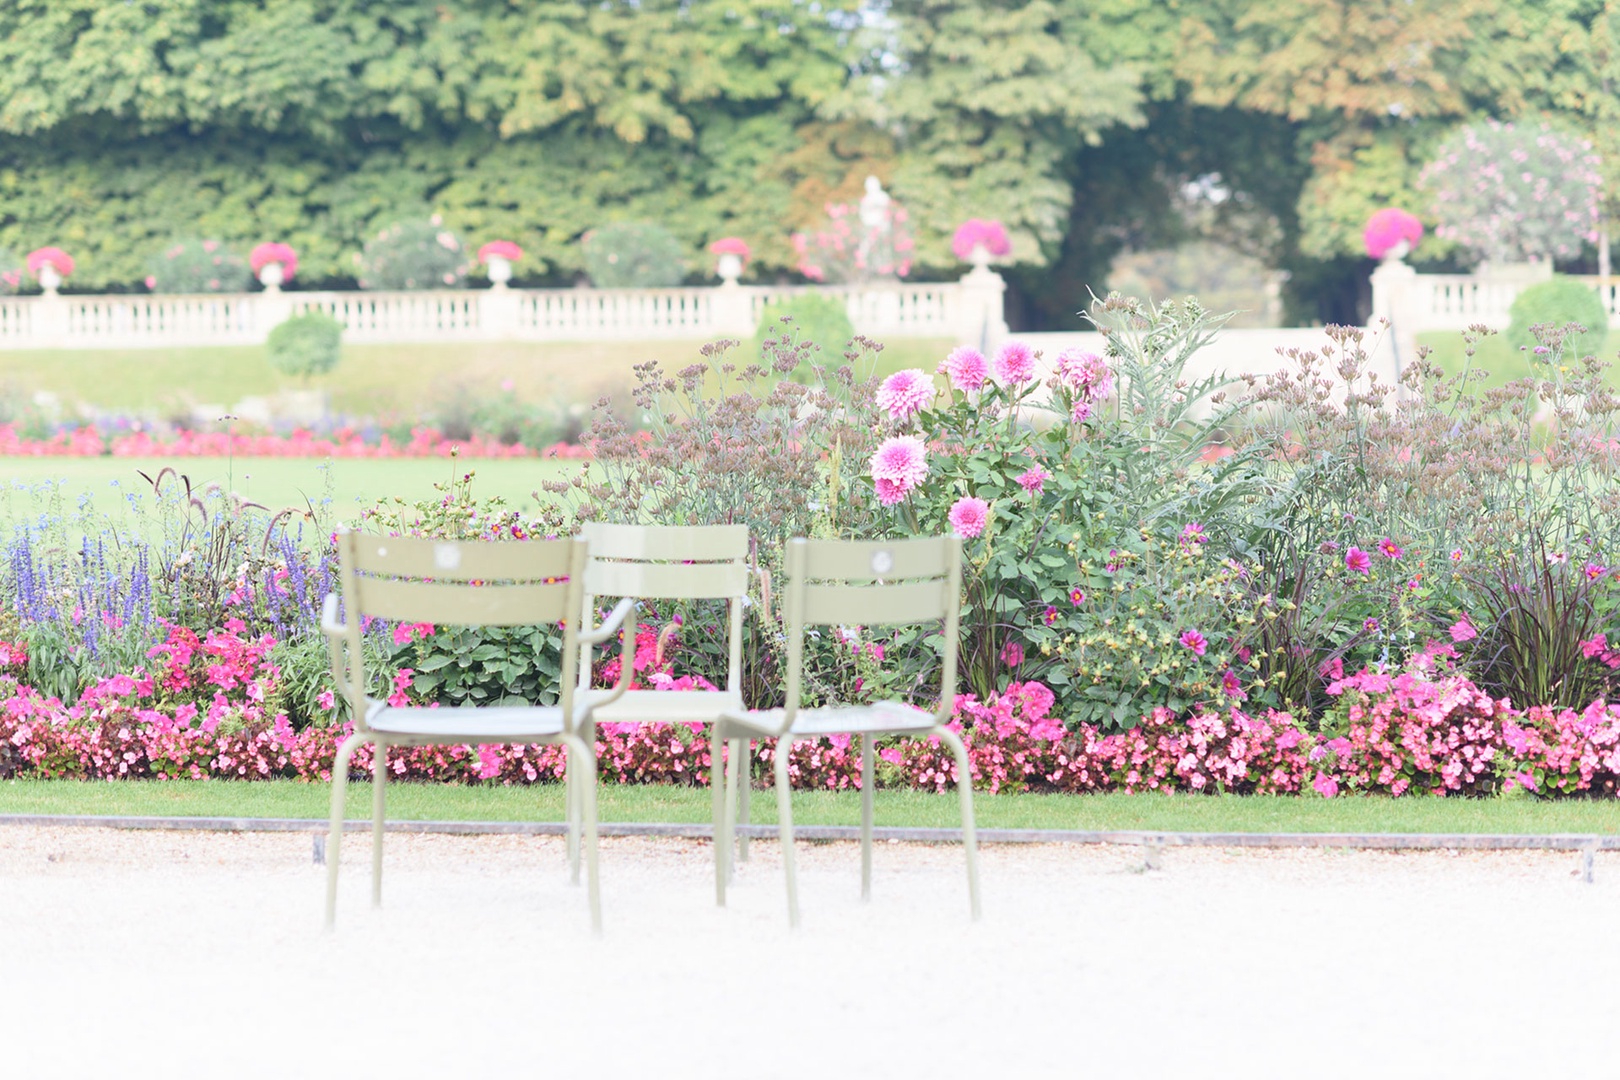 Relax in the peaceful Luxembourg Gardens, just minutes from the apartment